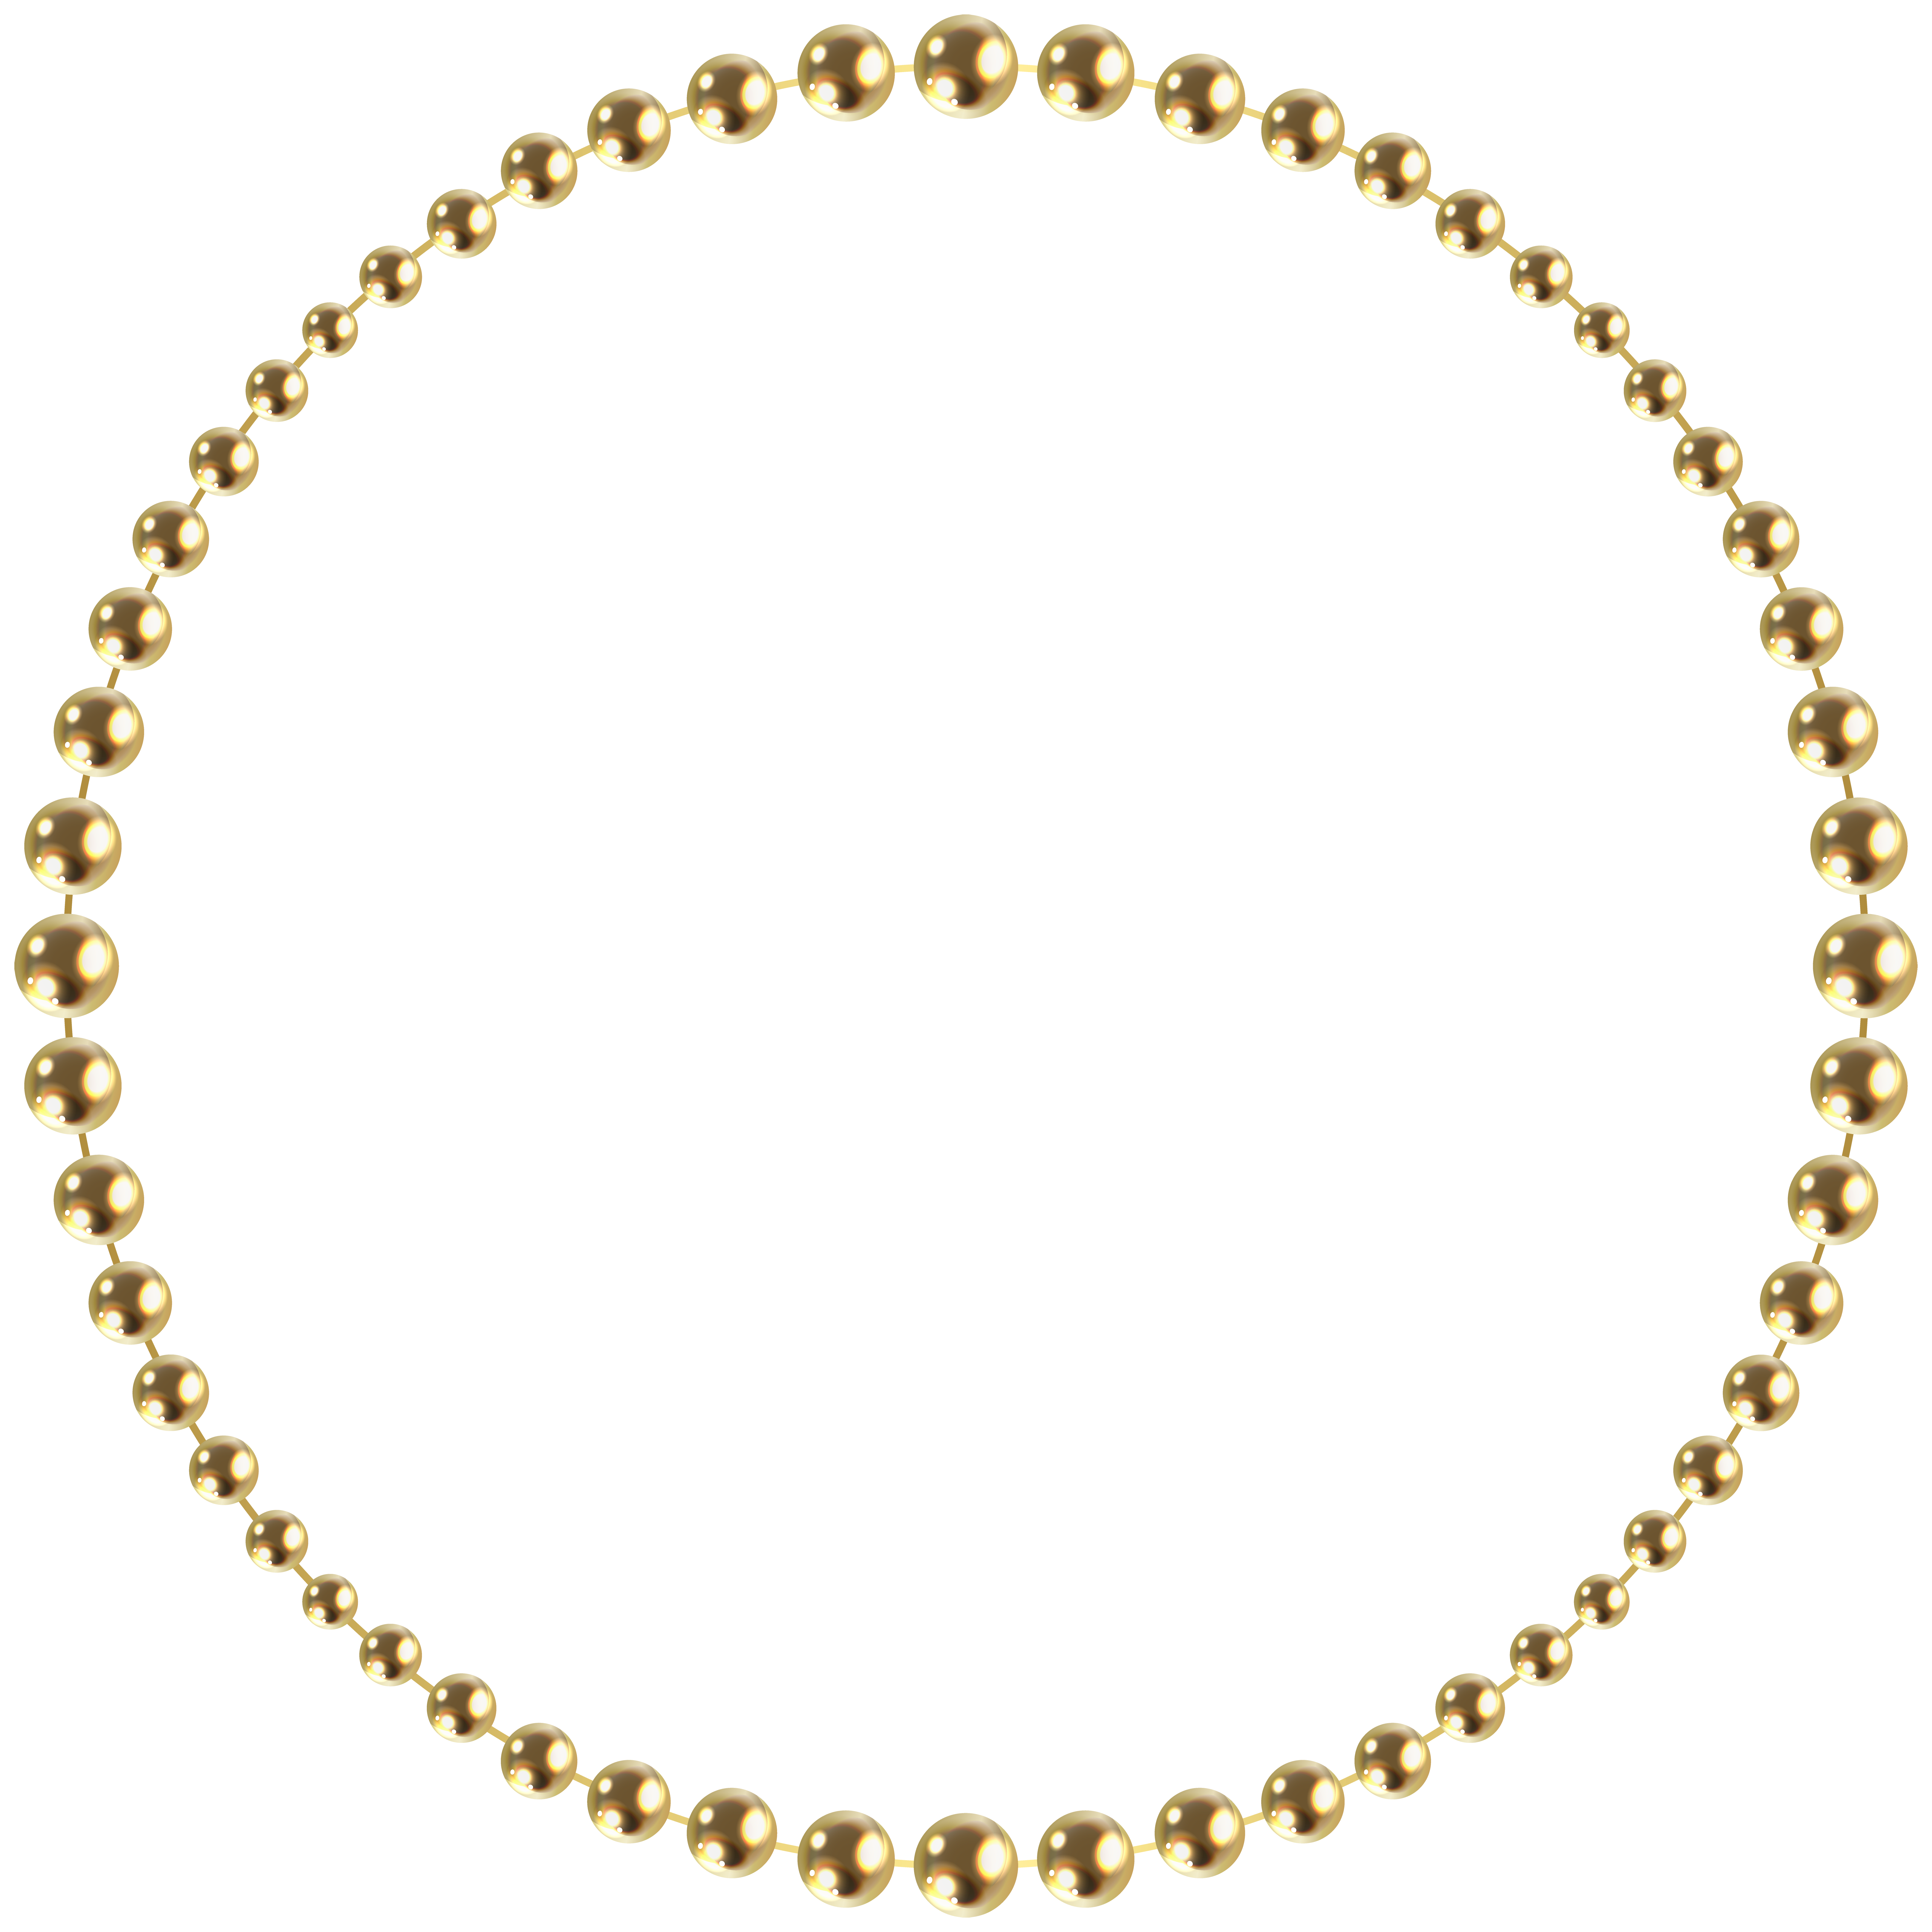 Pearl clipart gold bead. Round beads border frame